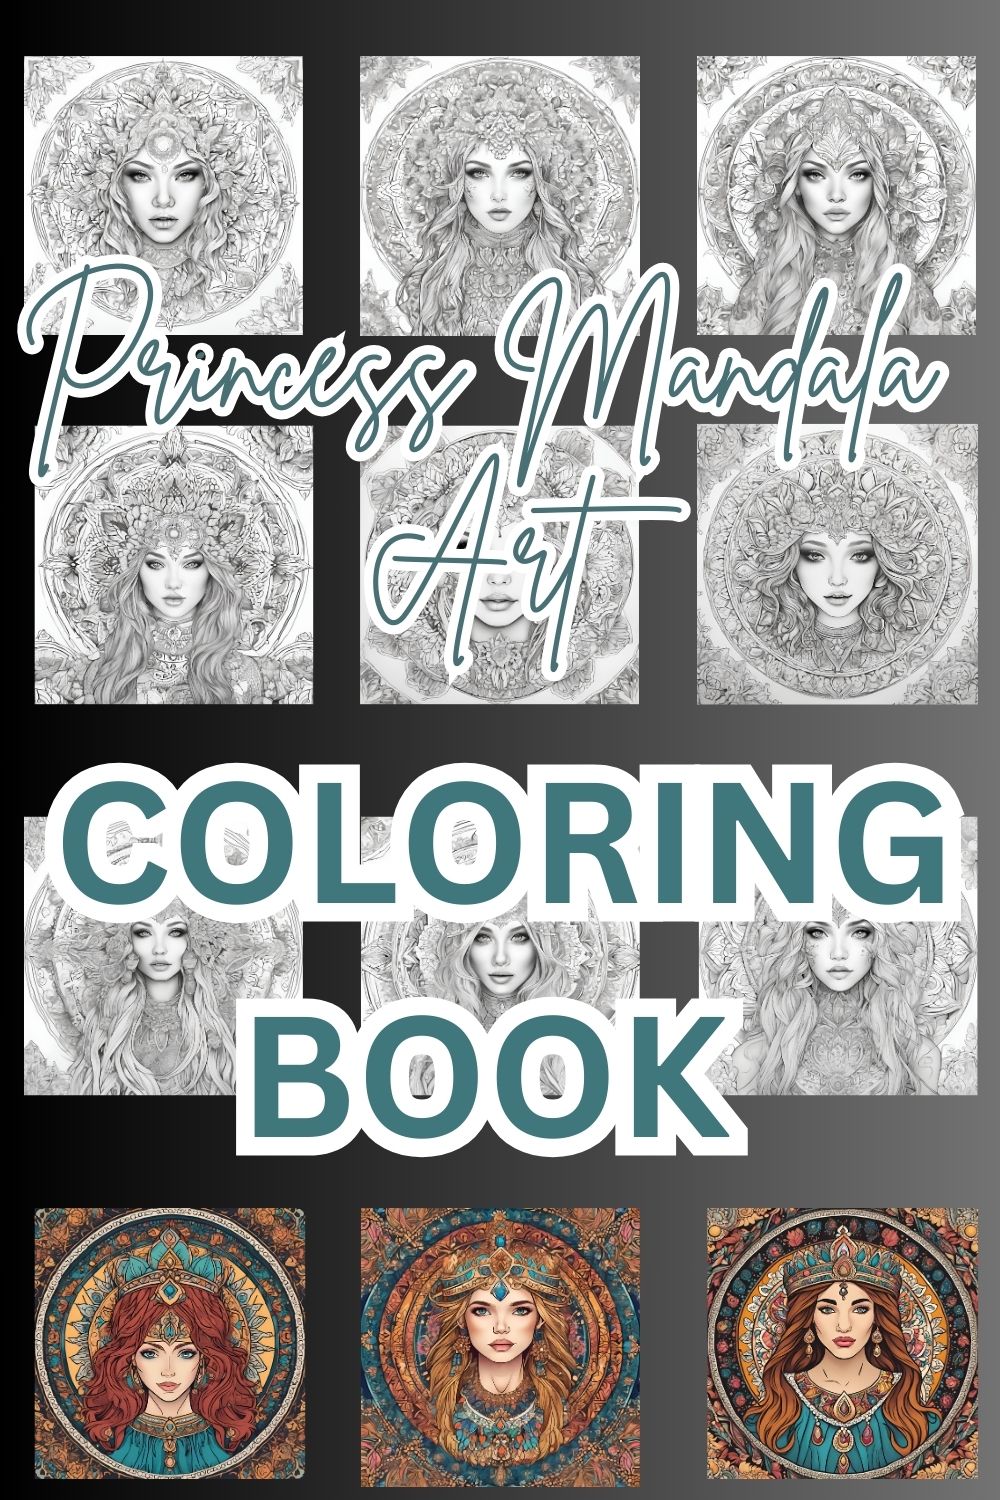 Mandala Art: Coloring book bundle of 25 coloring pages including 4 Colored pages pinterest preview image.